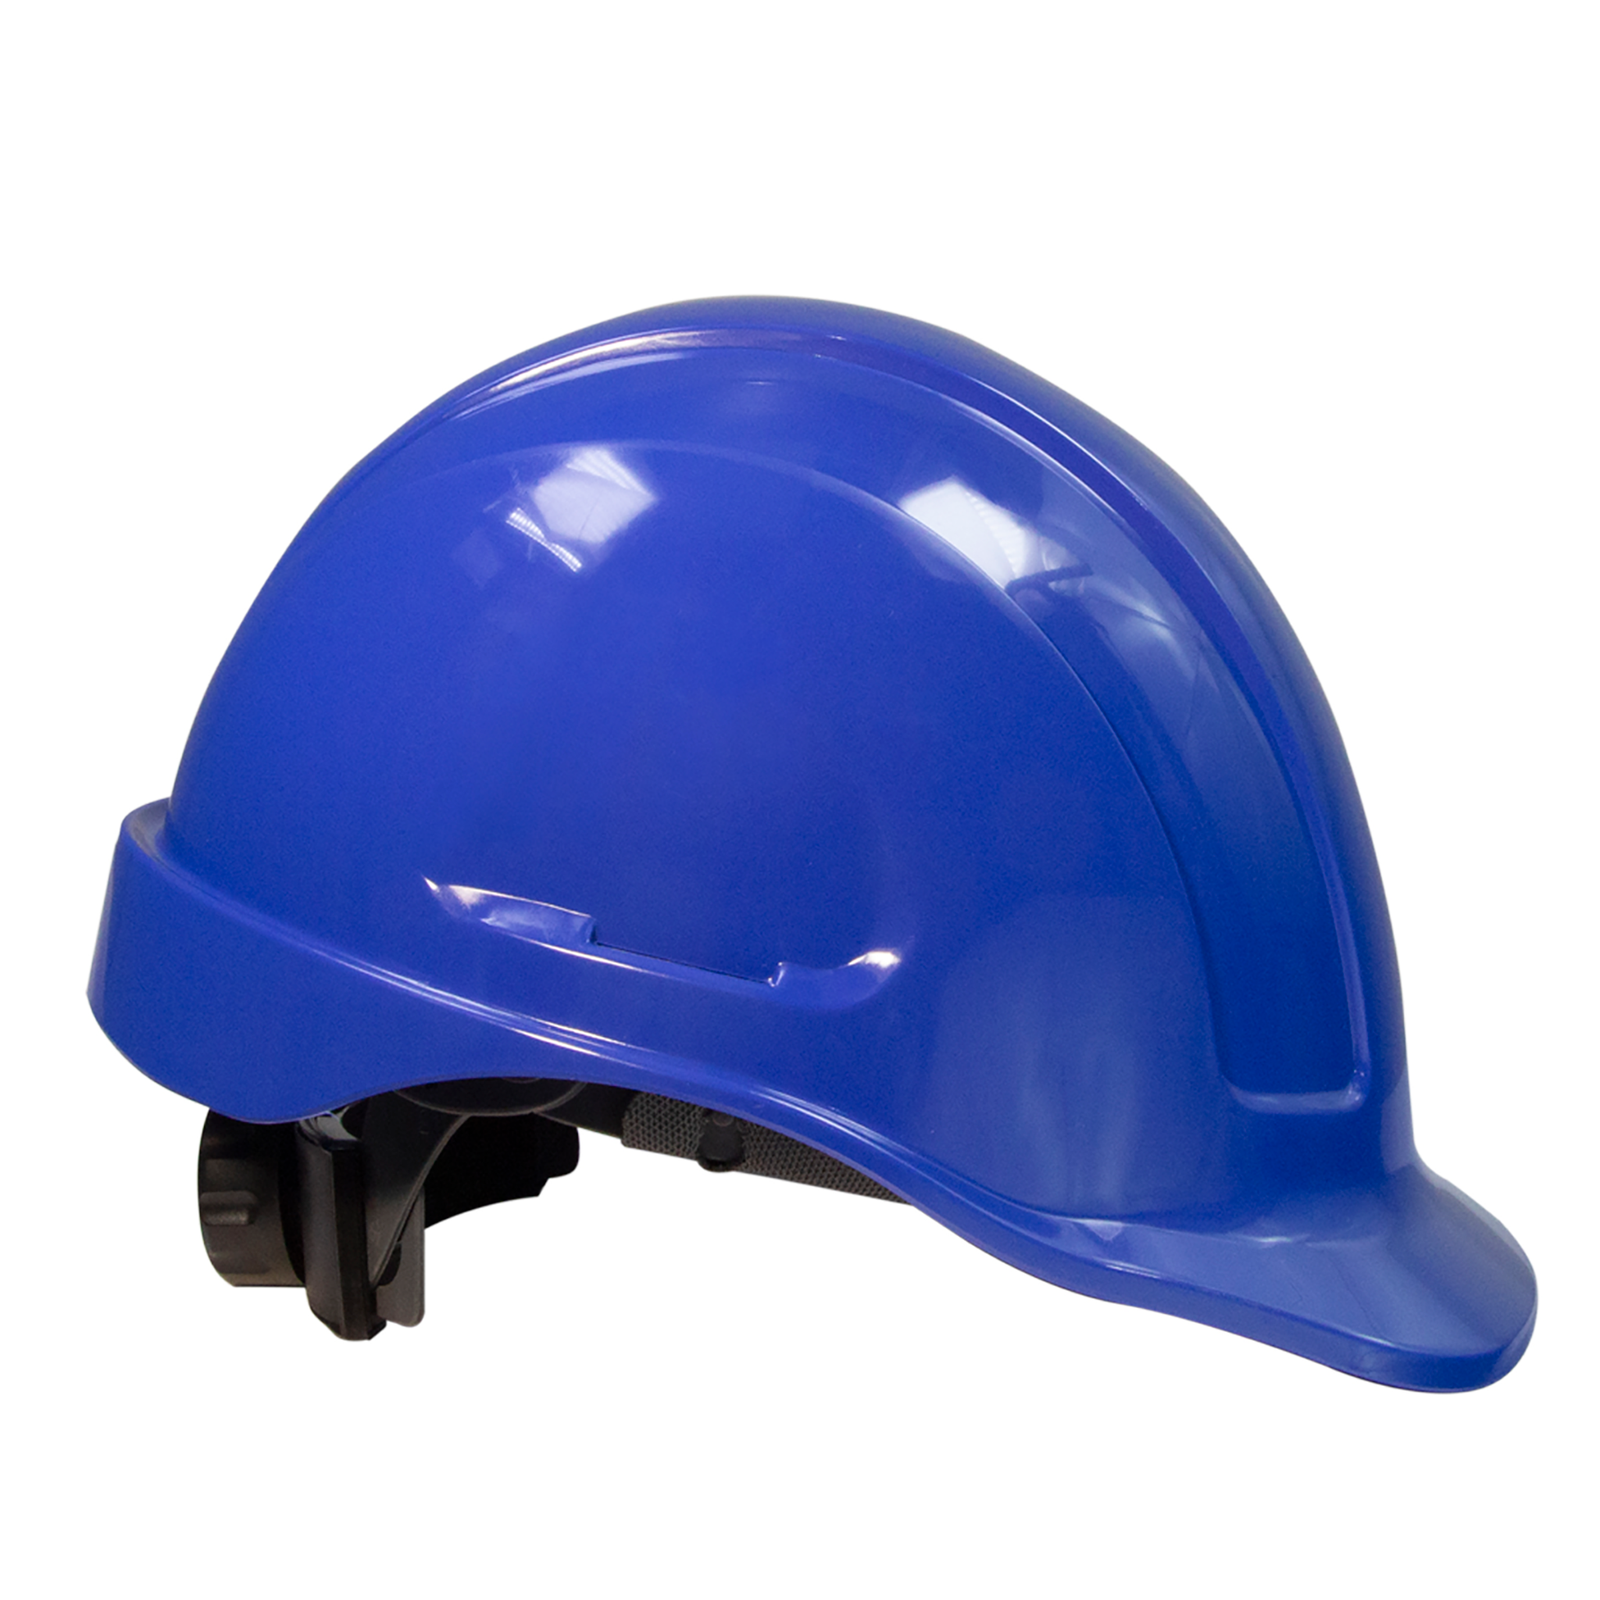 Diagonal view of a blue cap stile safety hard hat with 4 point suspension